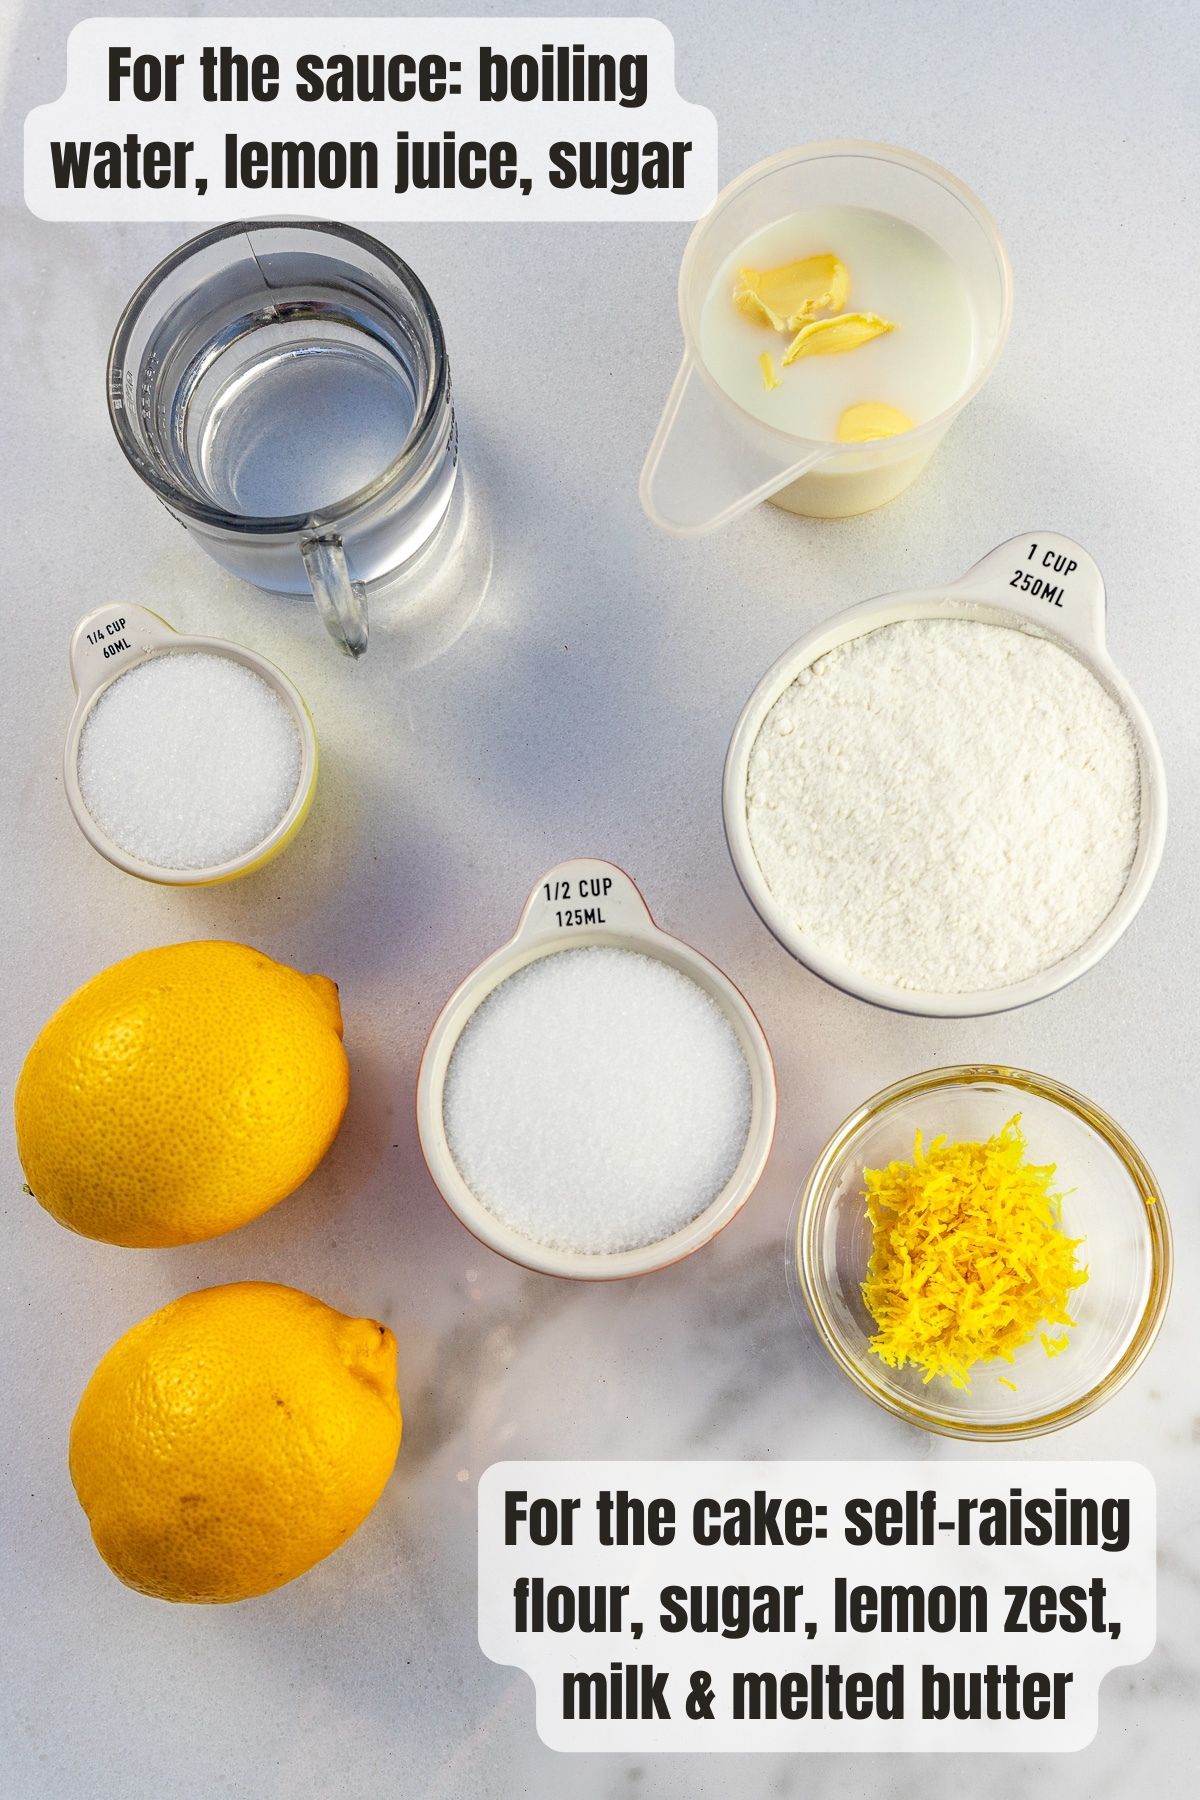 Overhead view of all the ingredients needed to make an easy lemon pudding on a marble background, including 2 lemons, lemon zest, sugar, self-raising flour, milk and butter.